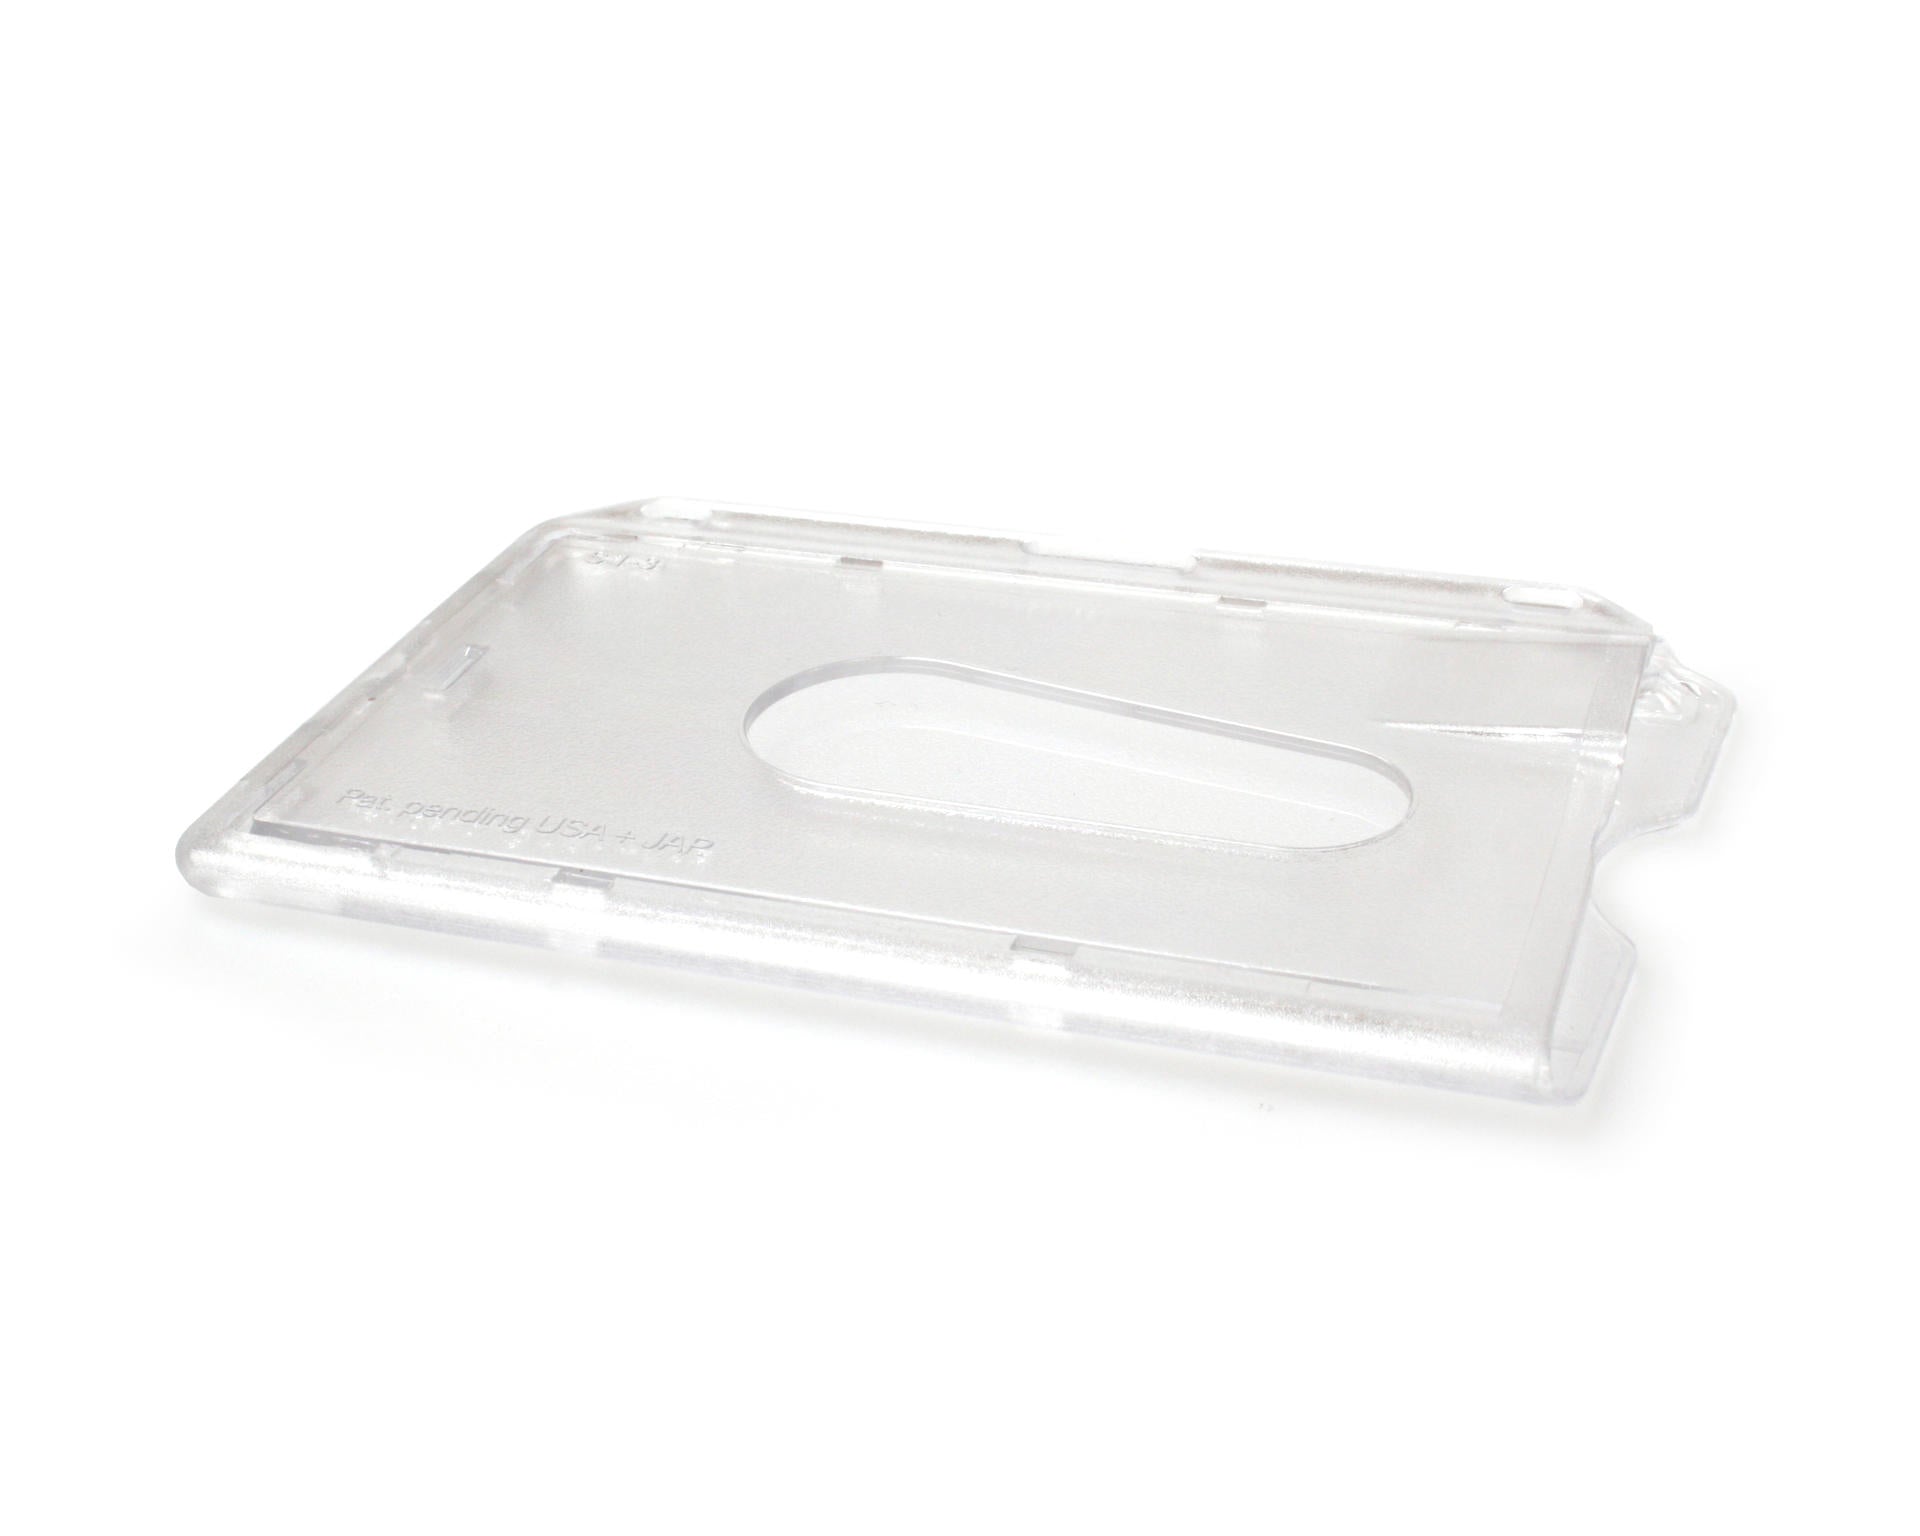 Enclosed Rigid Card Holders Frosted - Landscape, Horizontal (Pack of 100)